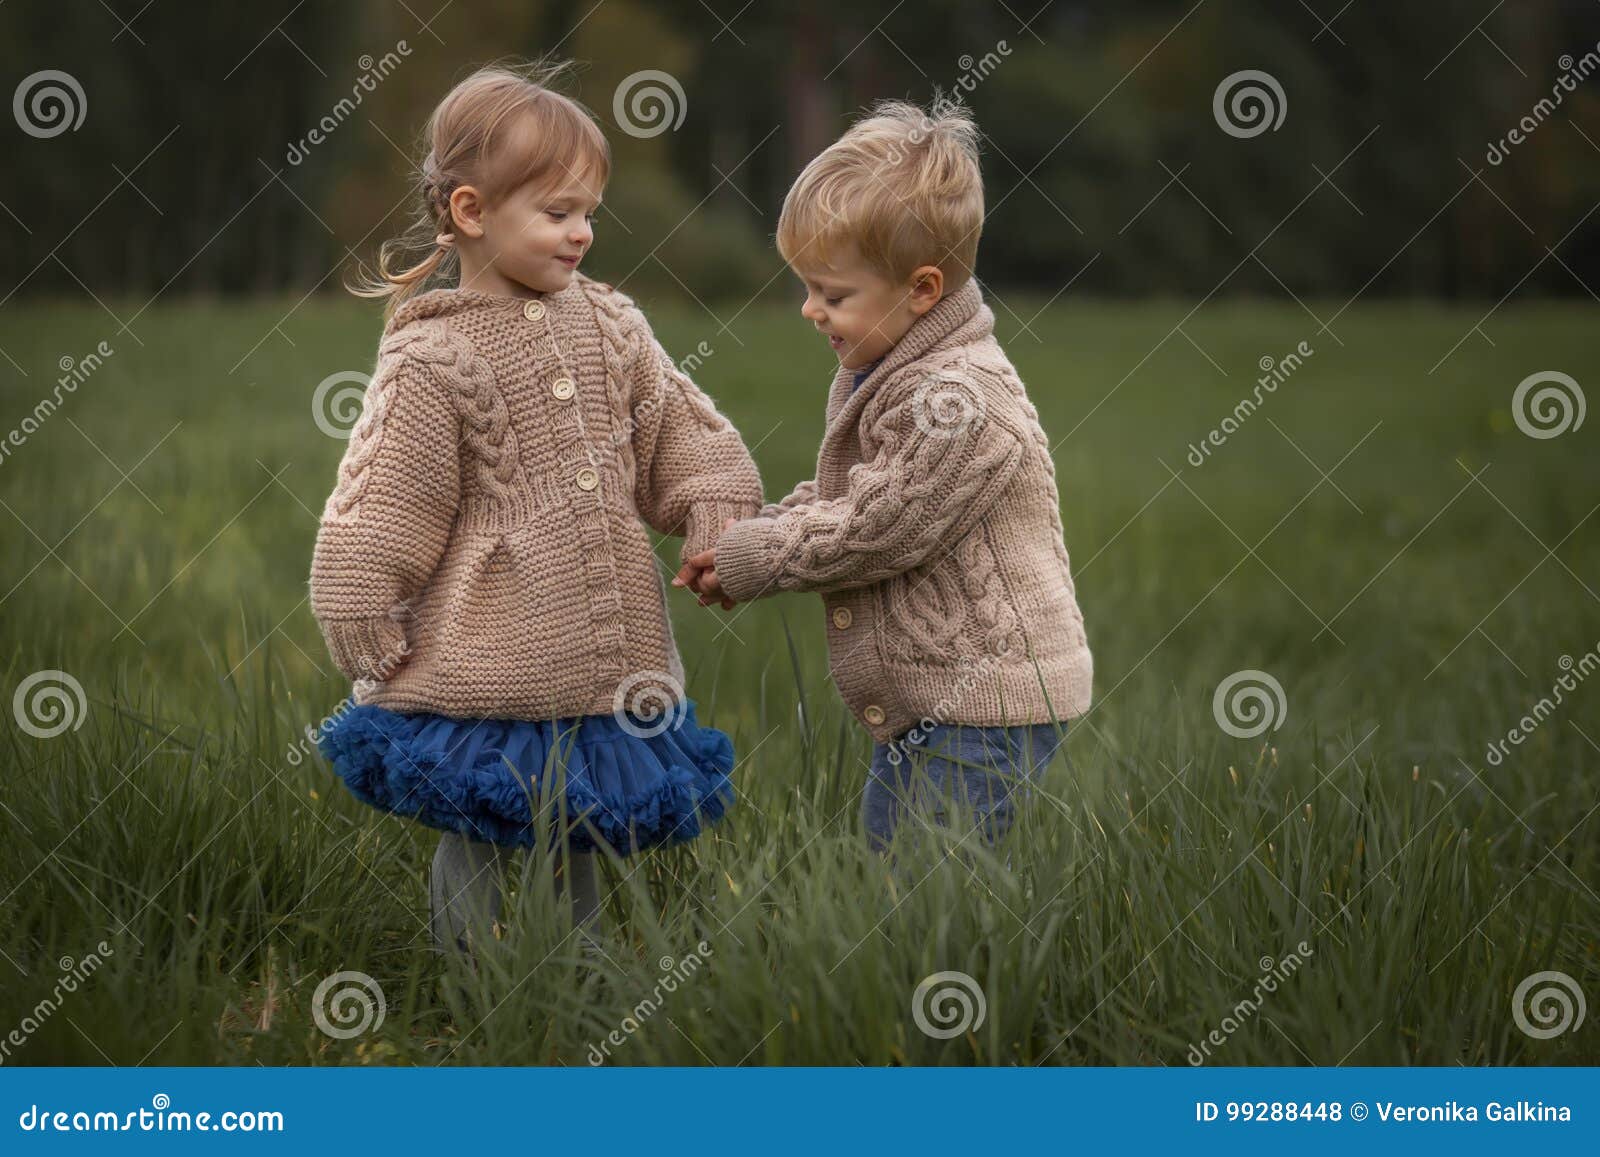 3 349 Cute Twins Boy Girl Photos Free Royalty Free Stock Photos From Dreamstime